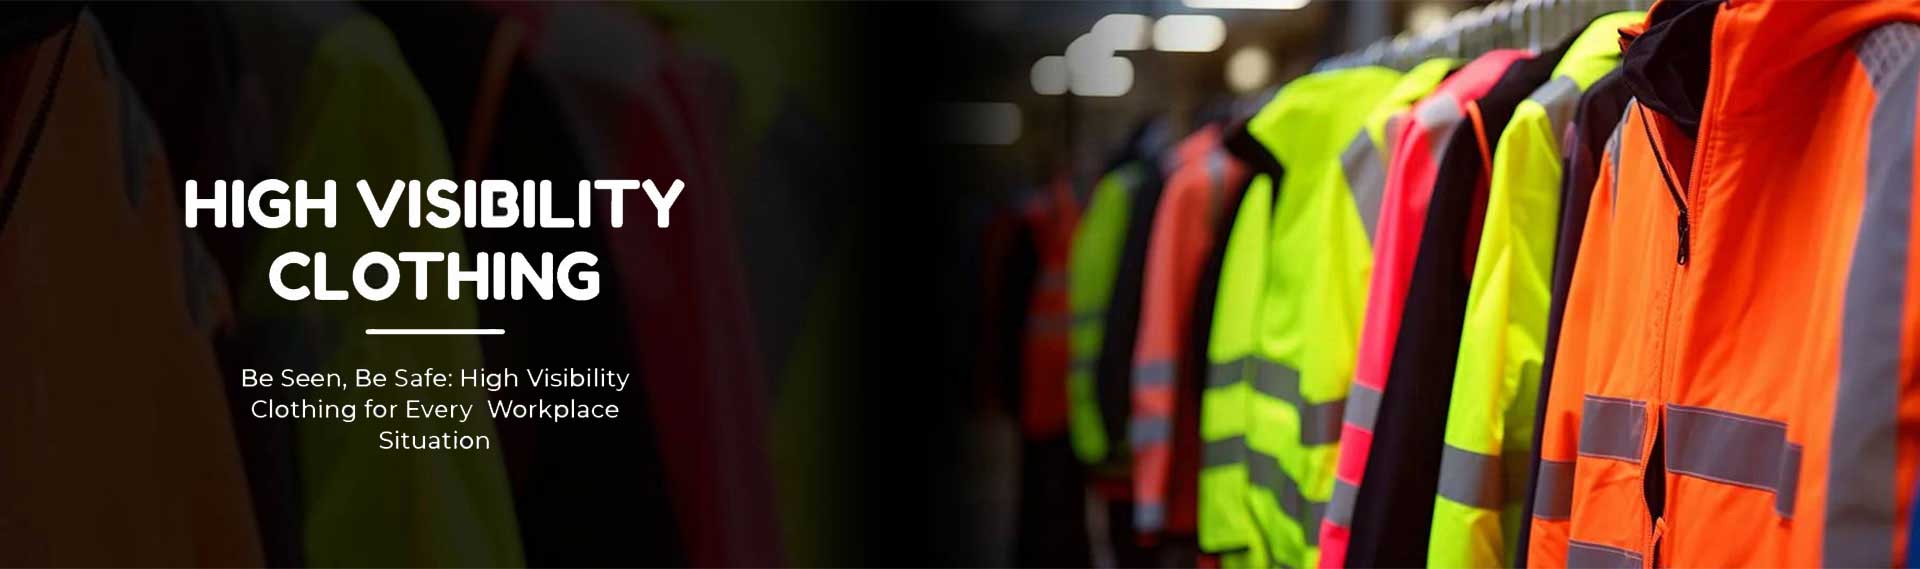 High Visibility Clothing Manufacturers in Zimbabwe